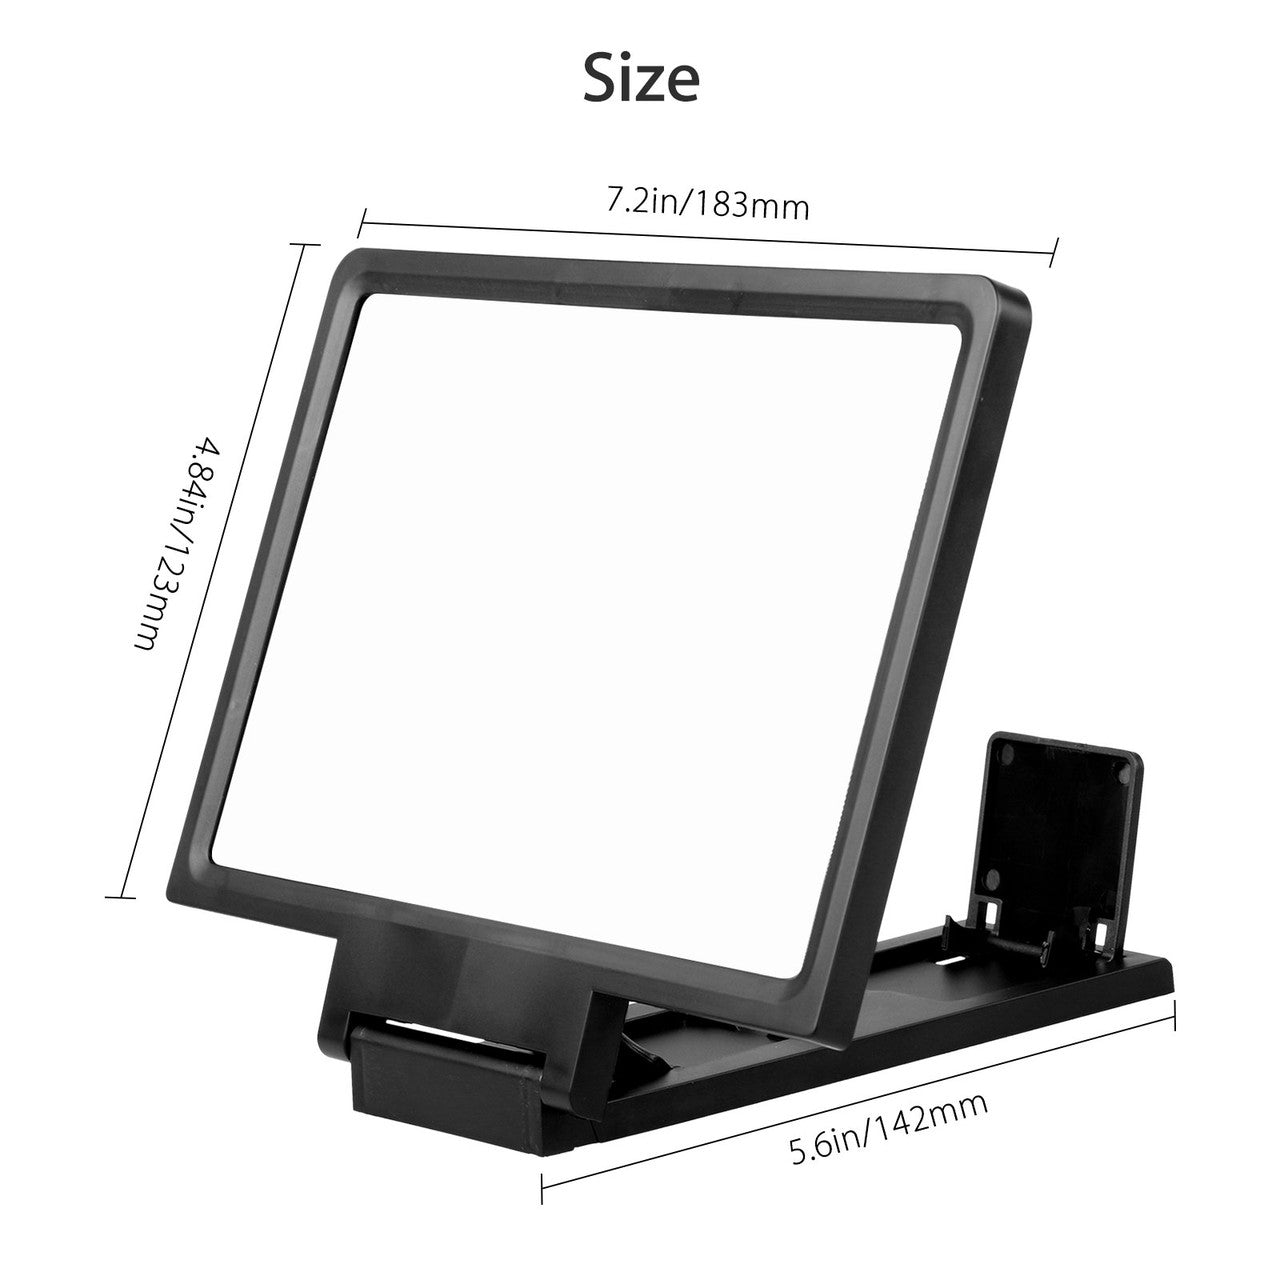 8" 3D HD Mobile Phone Screen Enlarge Magnifier Movies Amplifier with Practical Phone Bracket Stand Holder for All Smart Phones